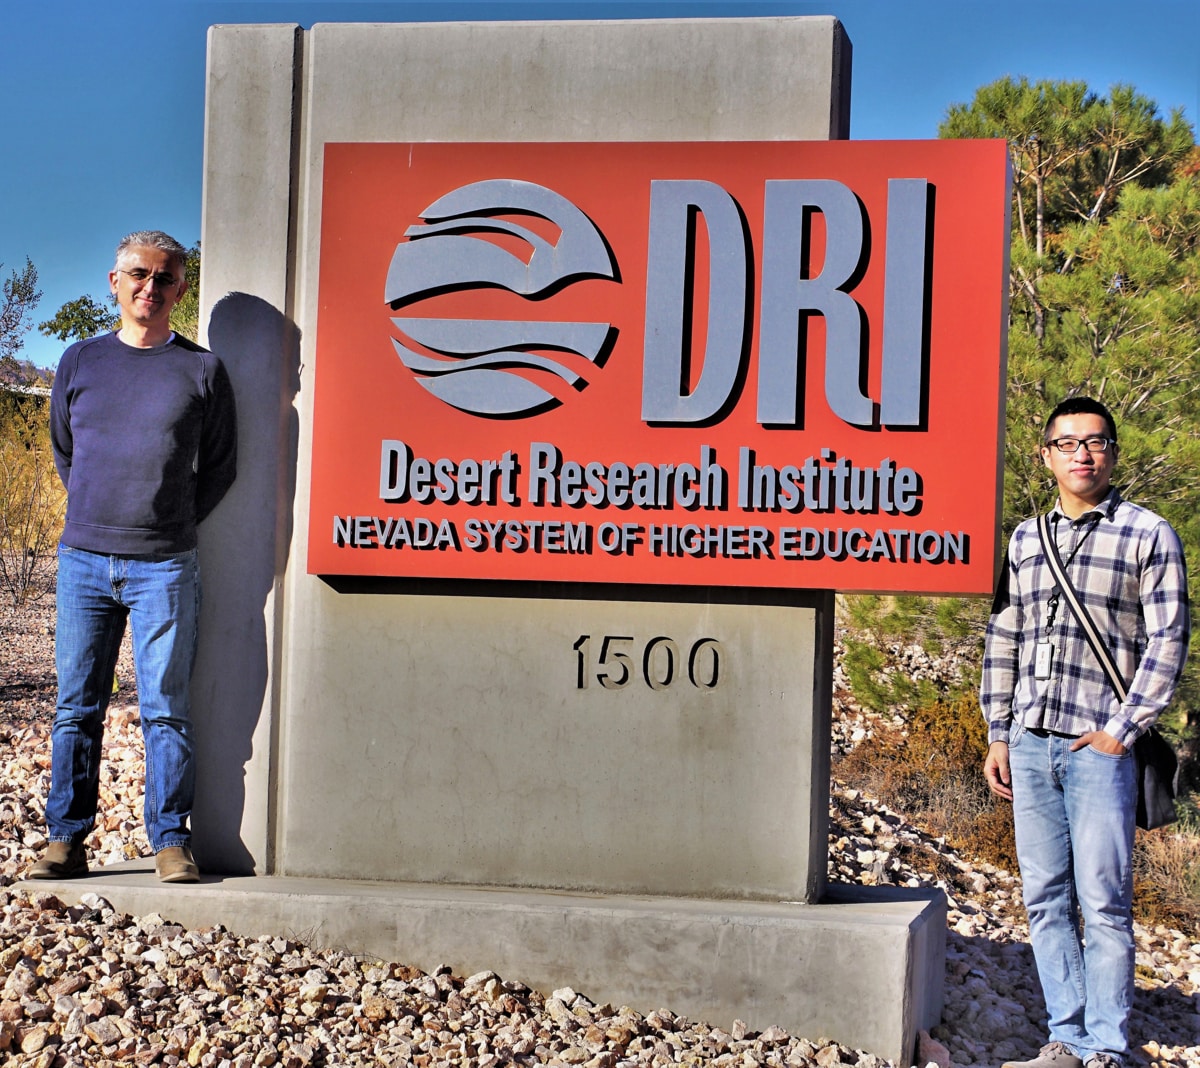 Researchers Markus Berli and Yuan Luo near a sign for the Desert Research Institute